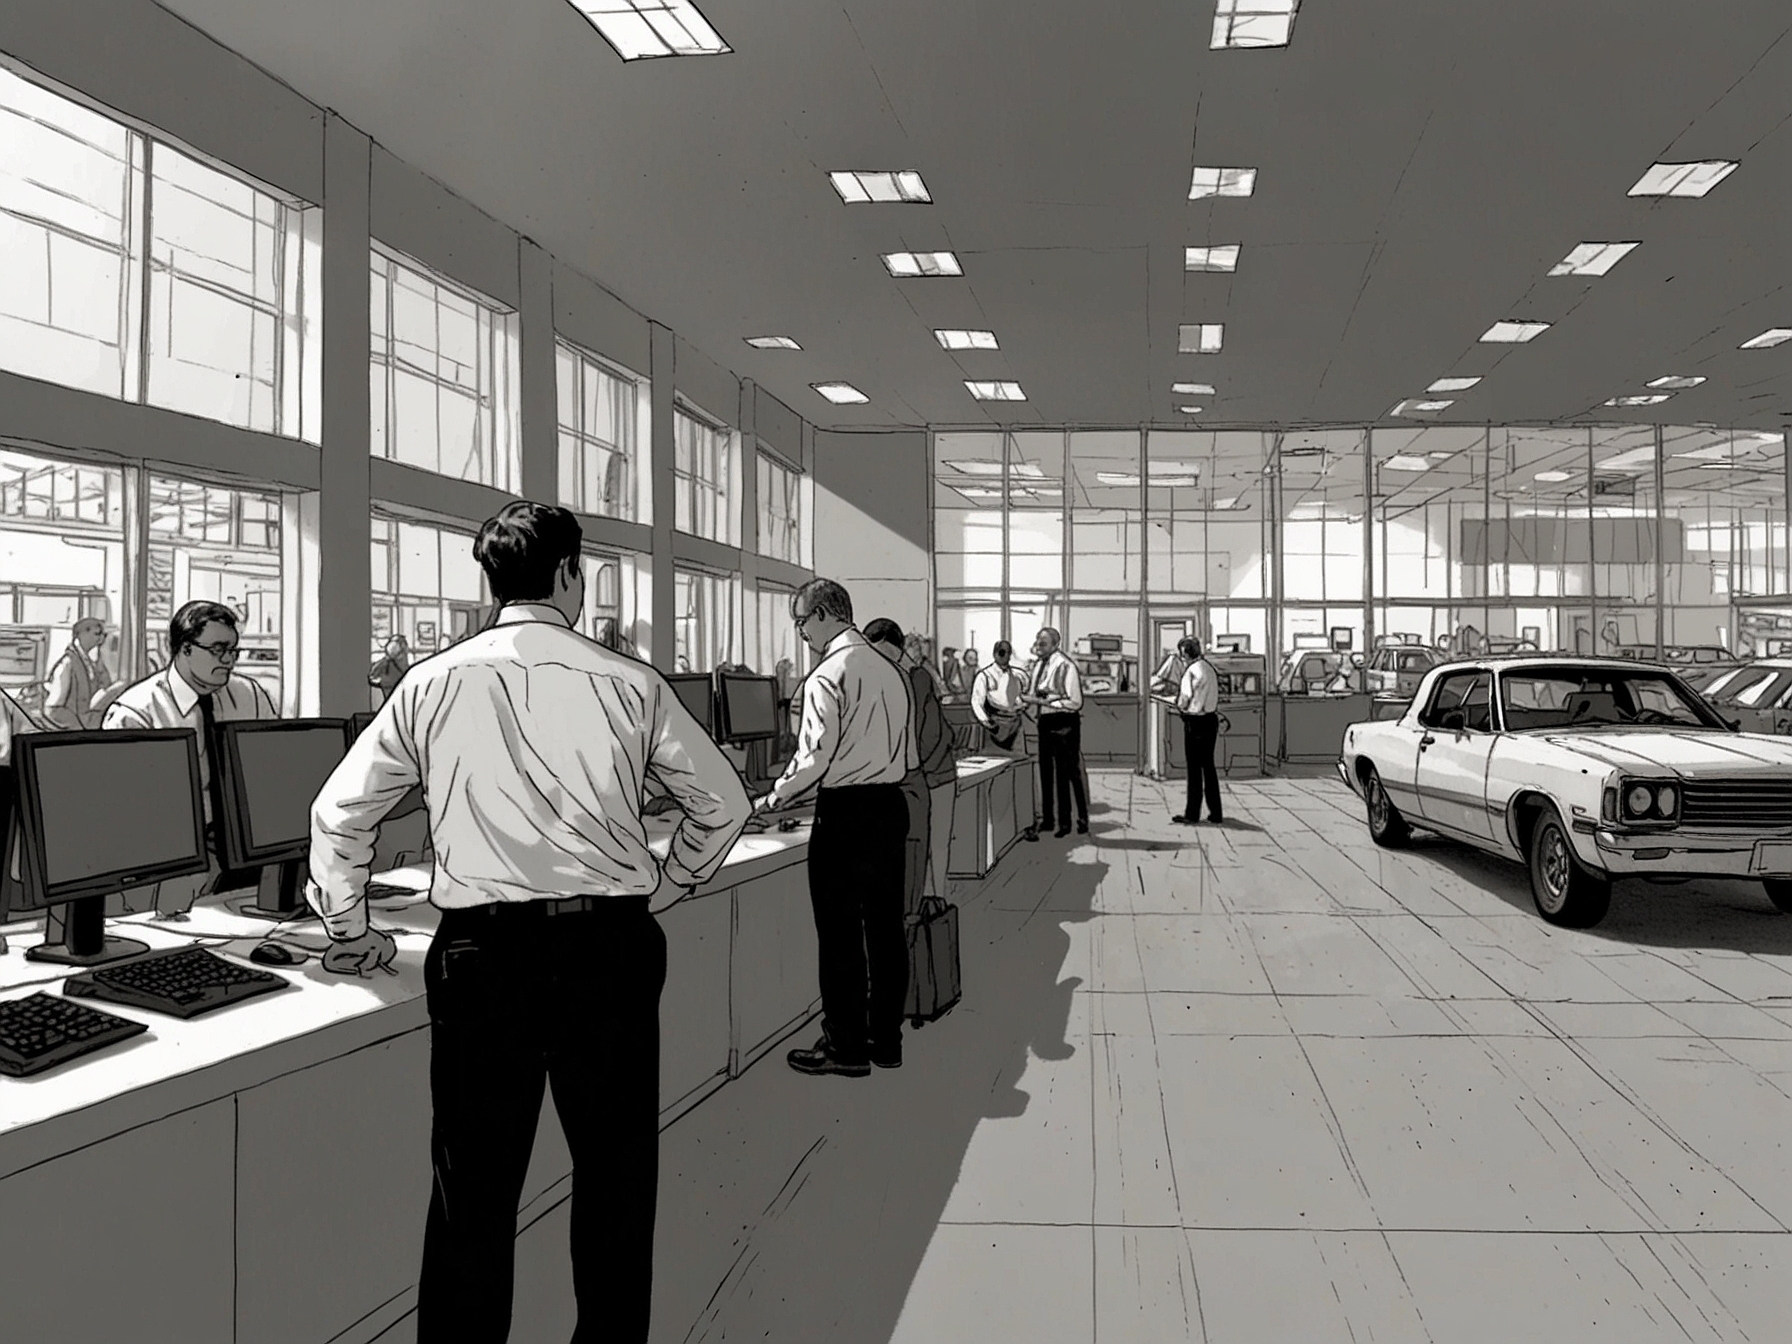 A bustling car dealership with staff members manually processing sales and paperwork, showing the impact of the computer system outage on daily operations.